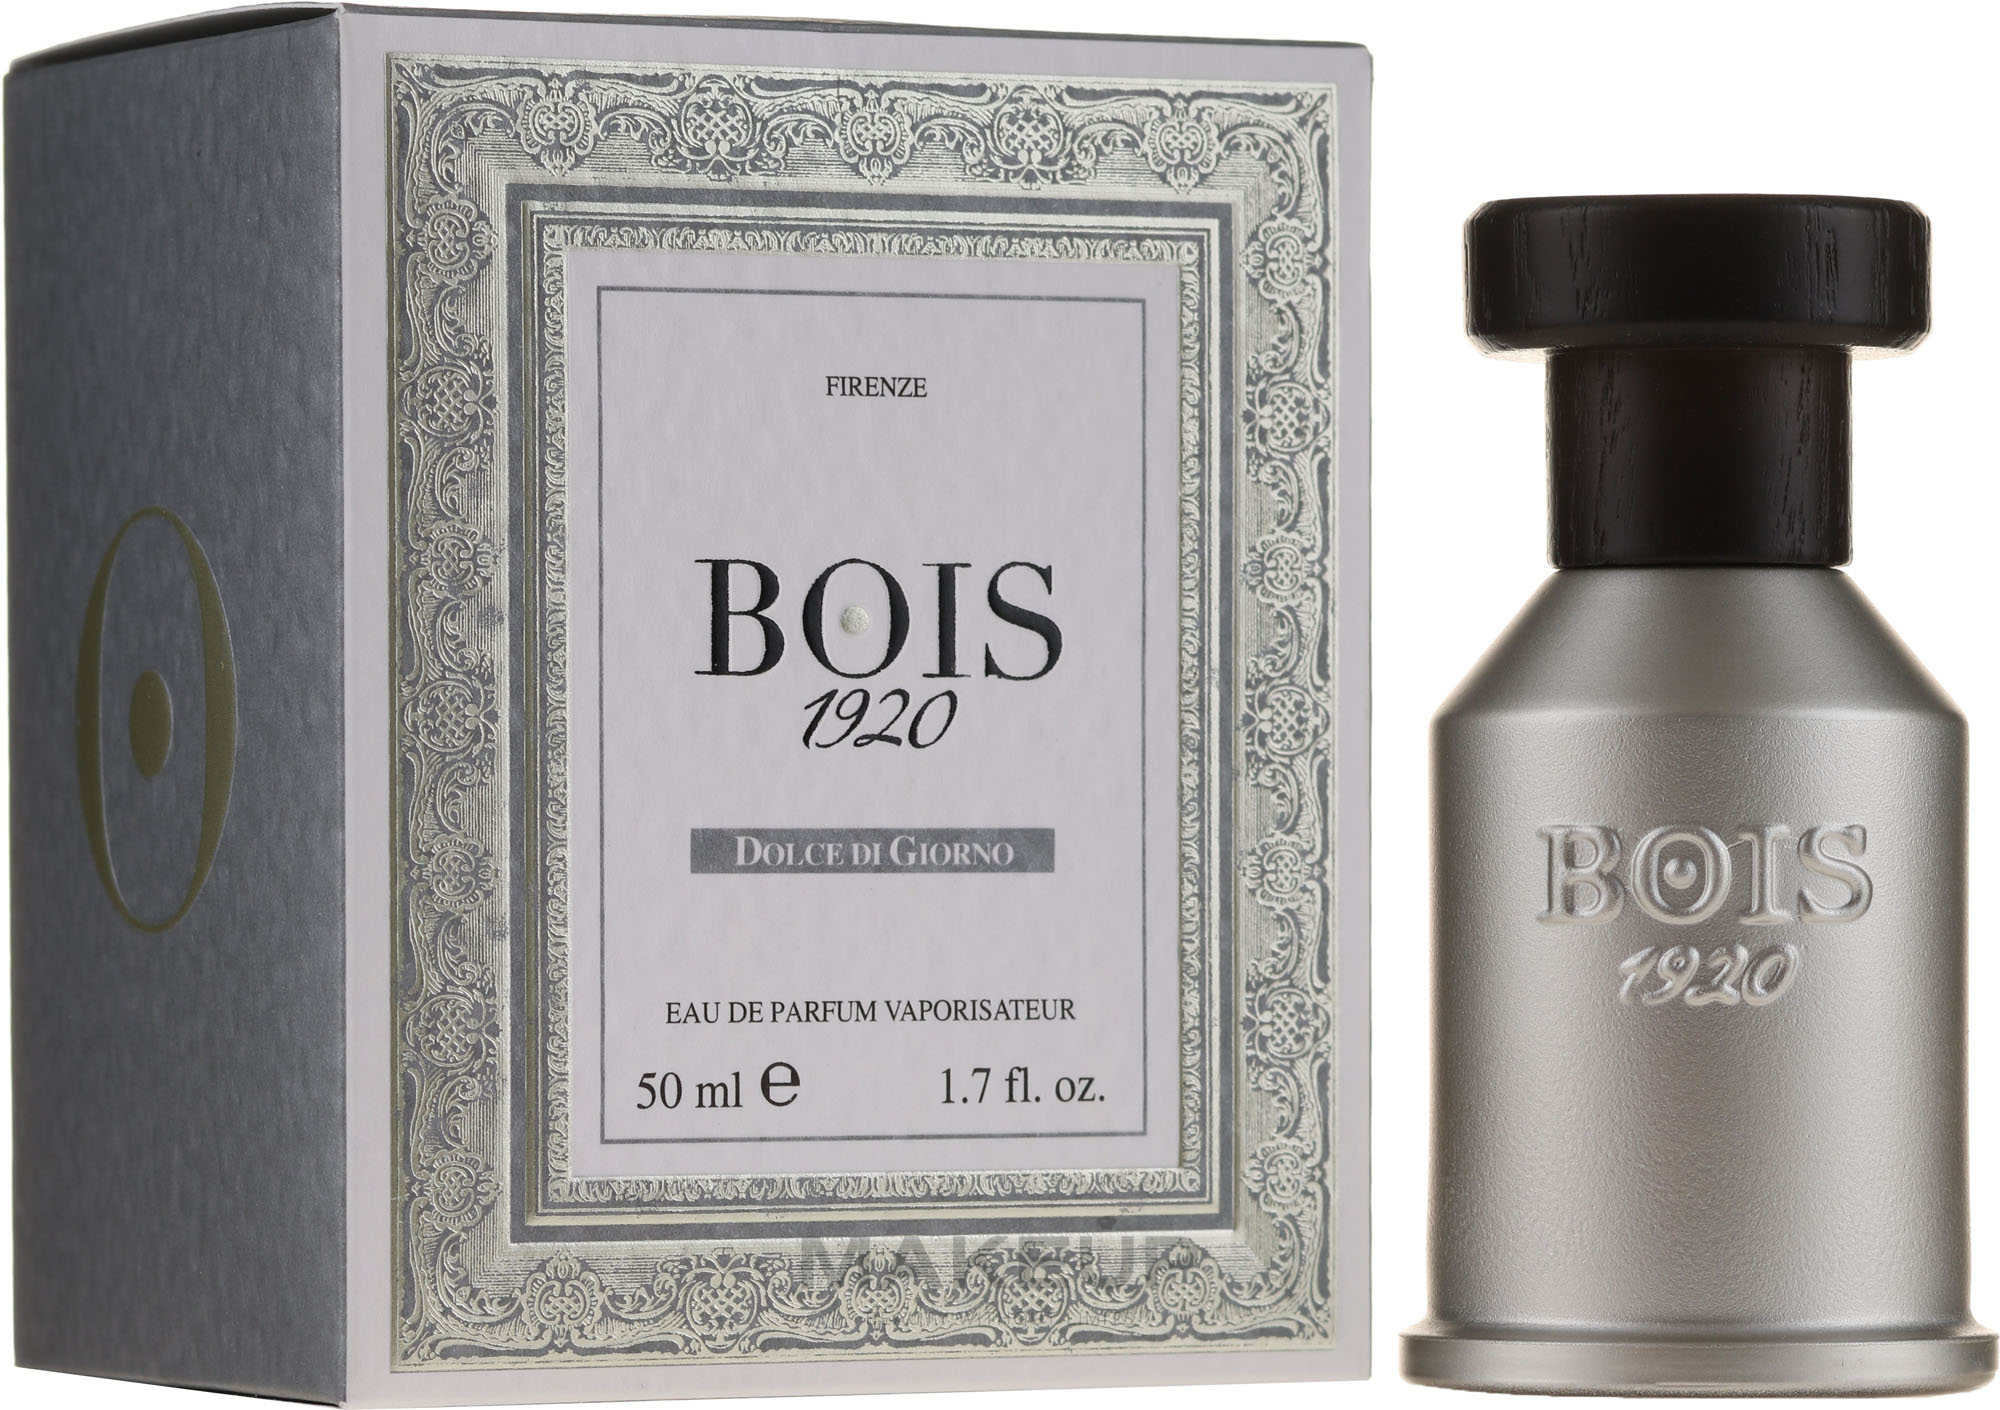 Bois 1920 Dolce di Giorno Limited Art Collection - Парфумована вода — фото 50ml